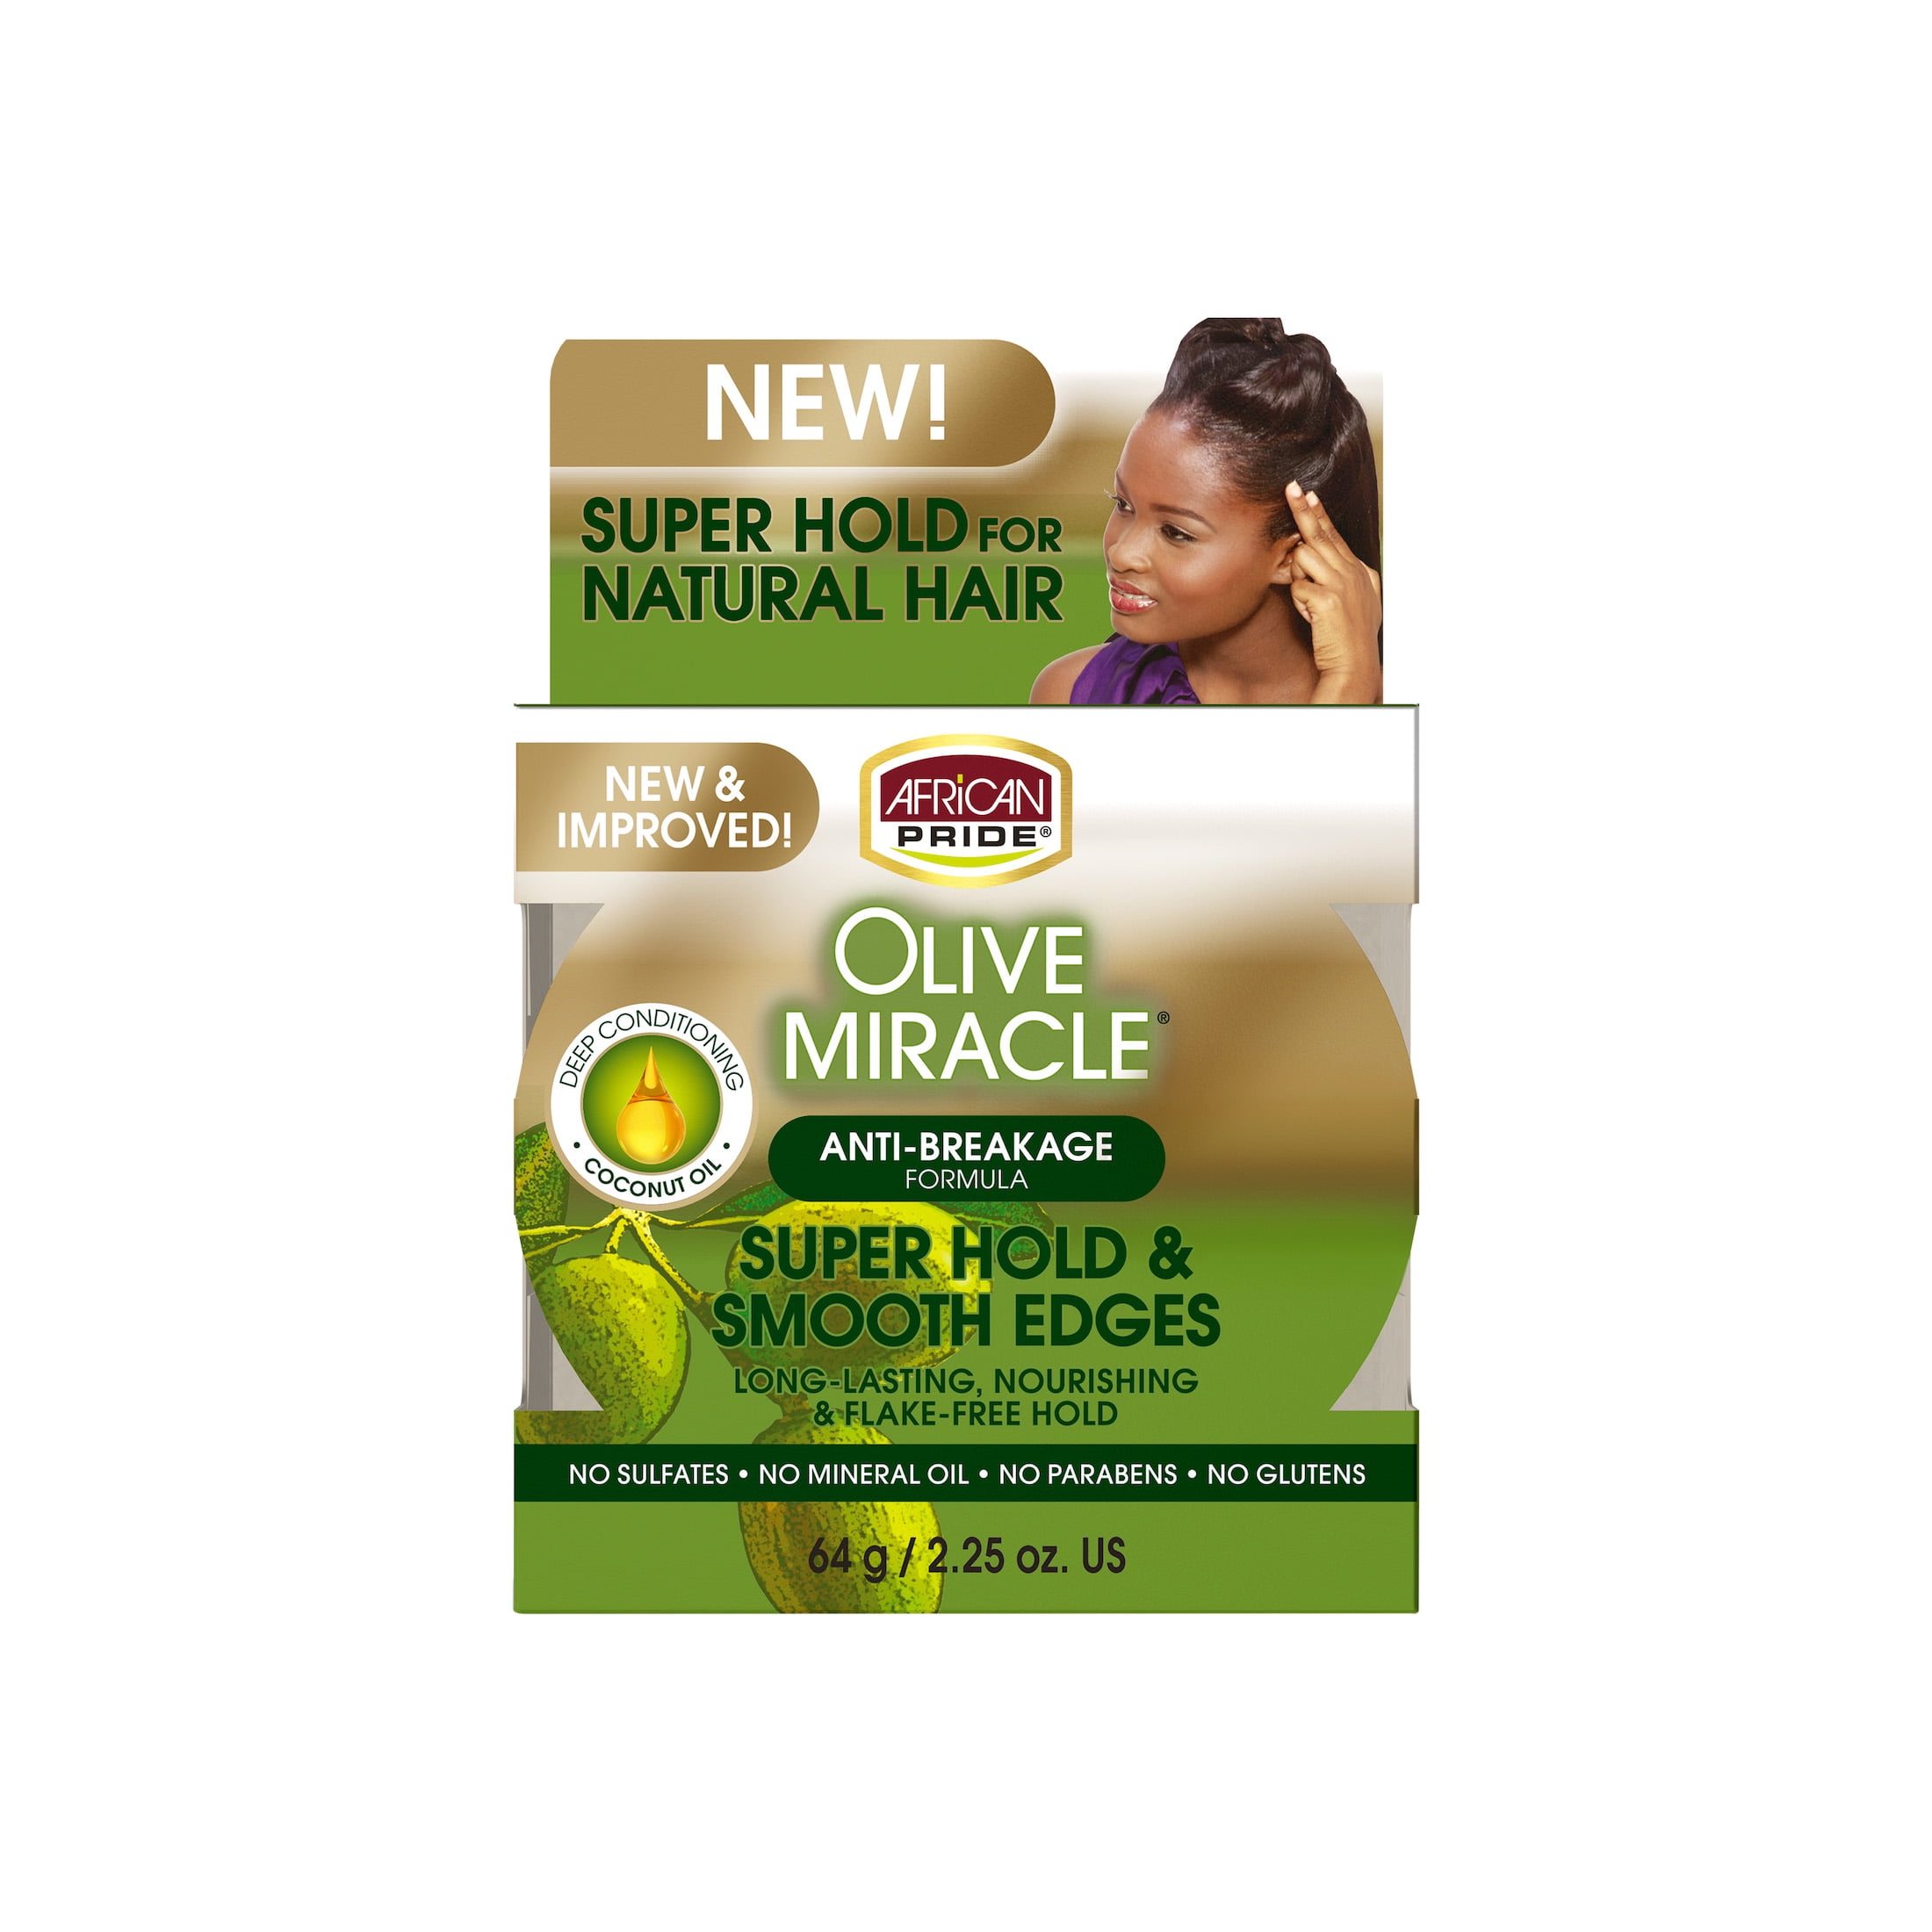 African Pride Olive Miracle Super Hold and Smooth Edges Moisturizing Jar Hair  Styling Gel,  oz 